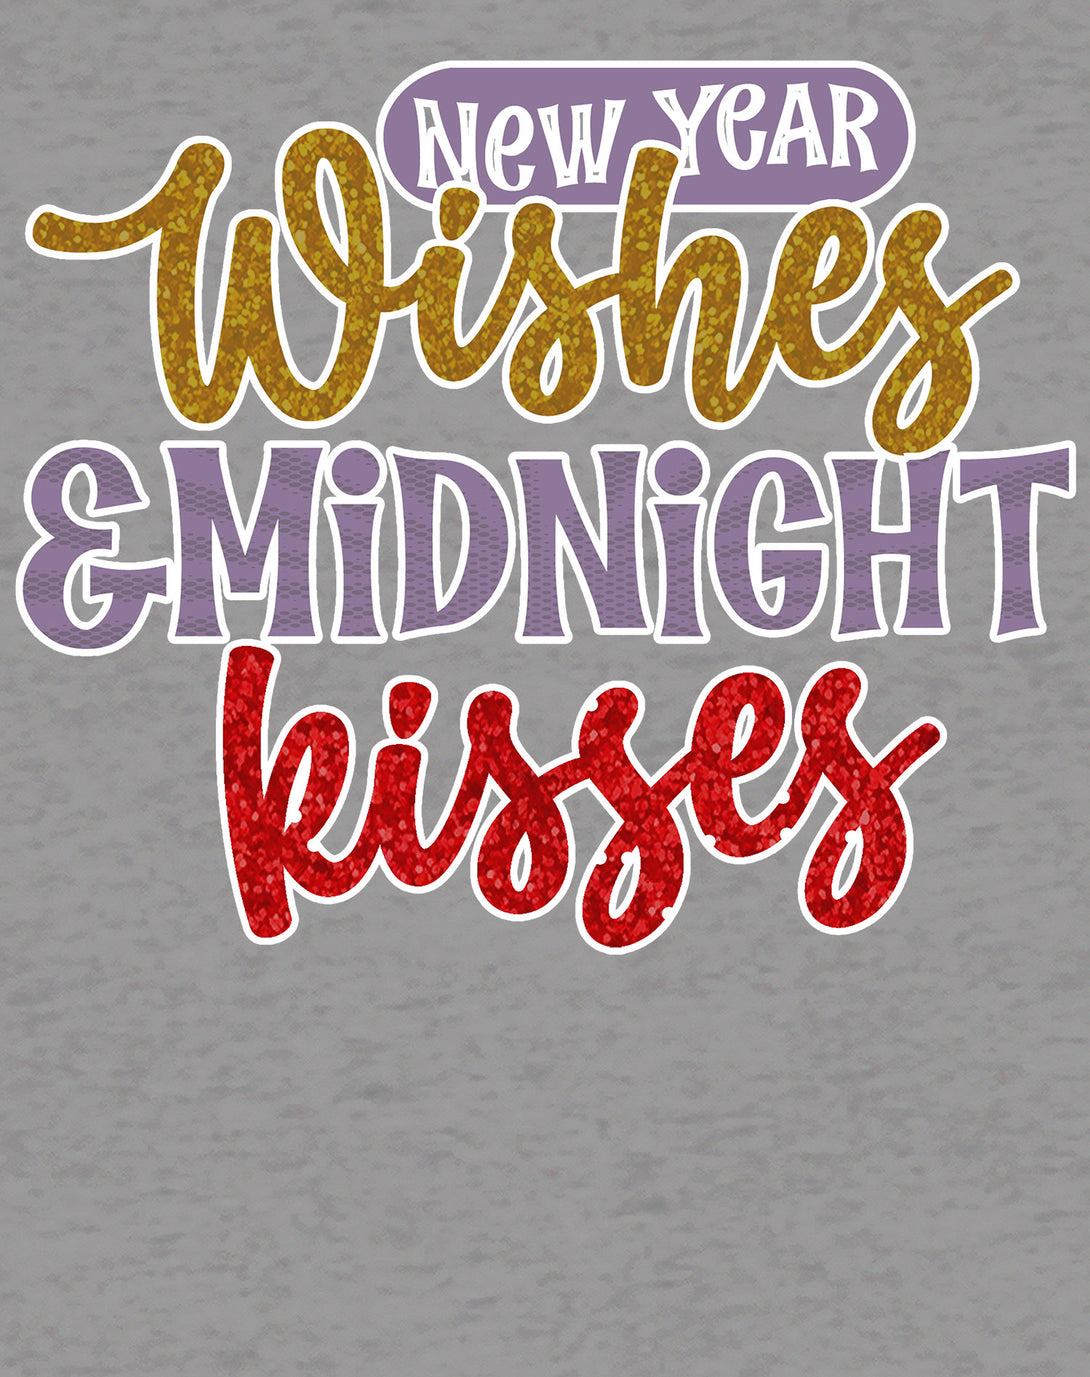 NYE New Year Wishes Midnight Kisses Eve Party Cute Couples Men's T-Shirt Sports Grey - Urban Species Design Close Up